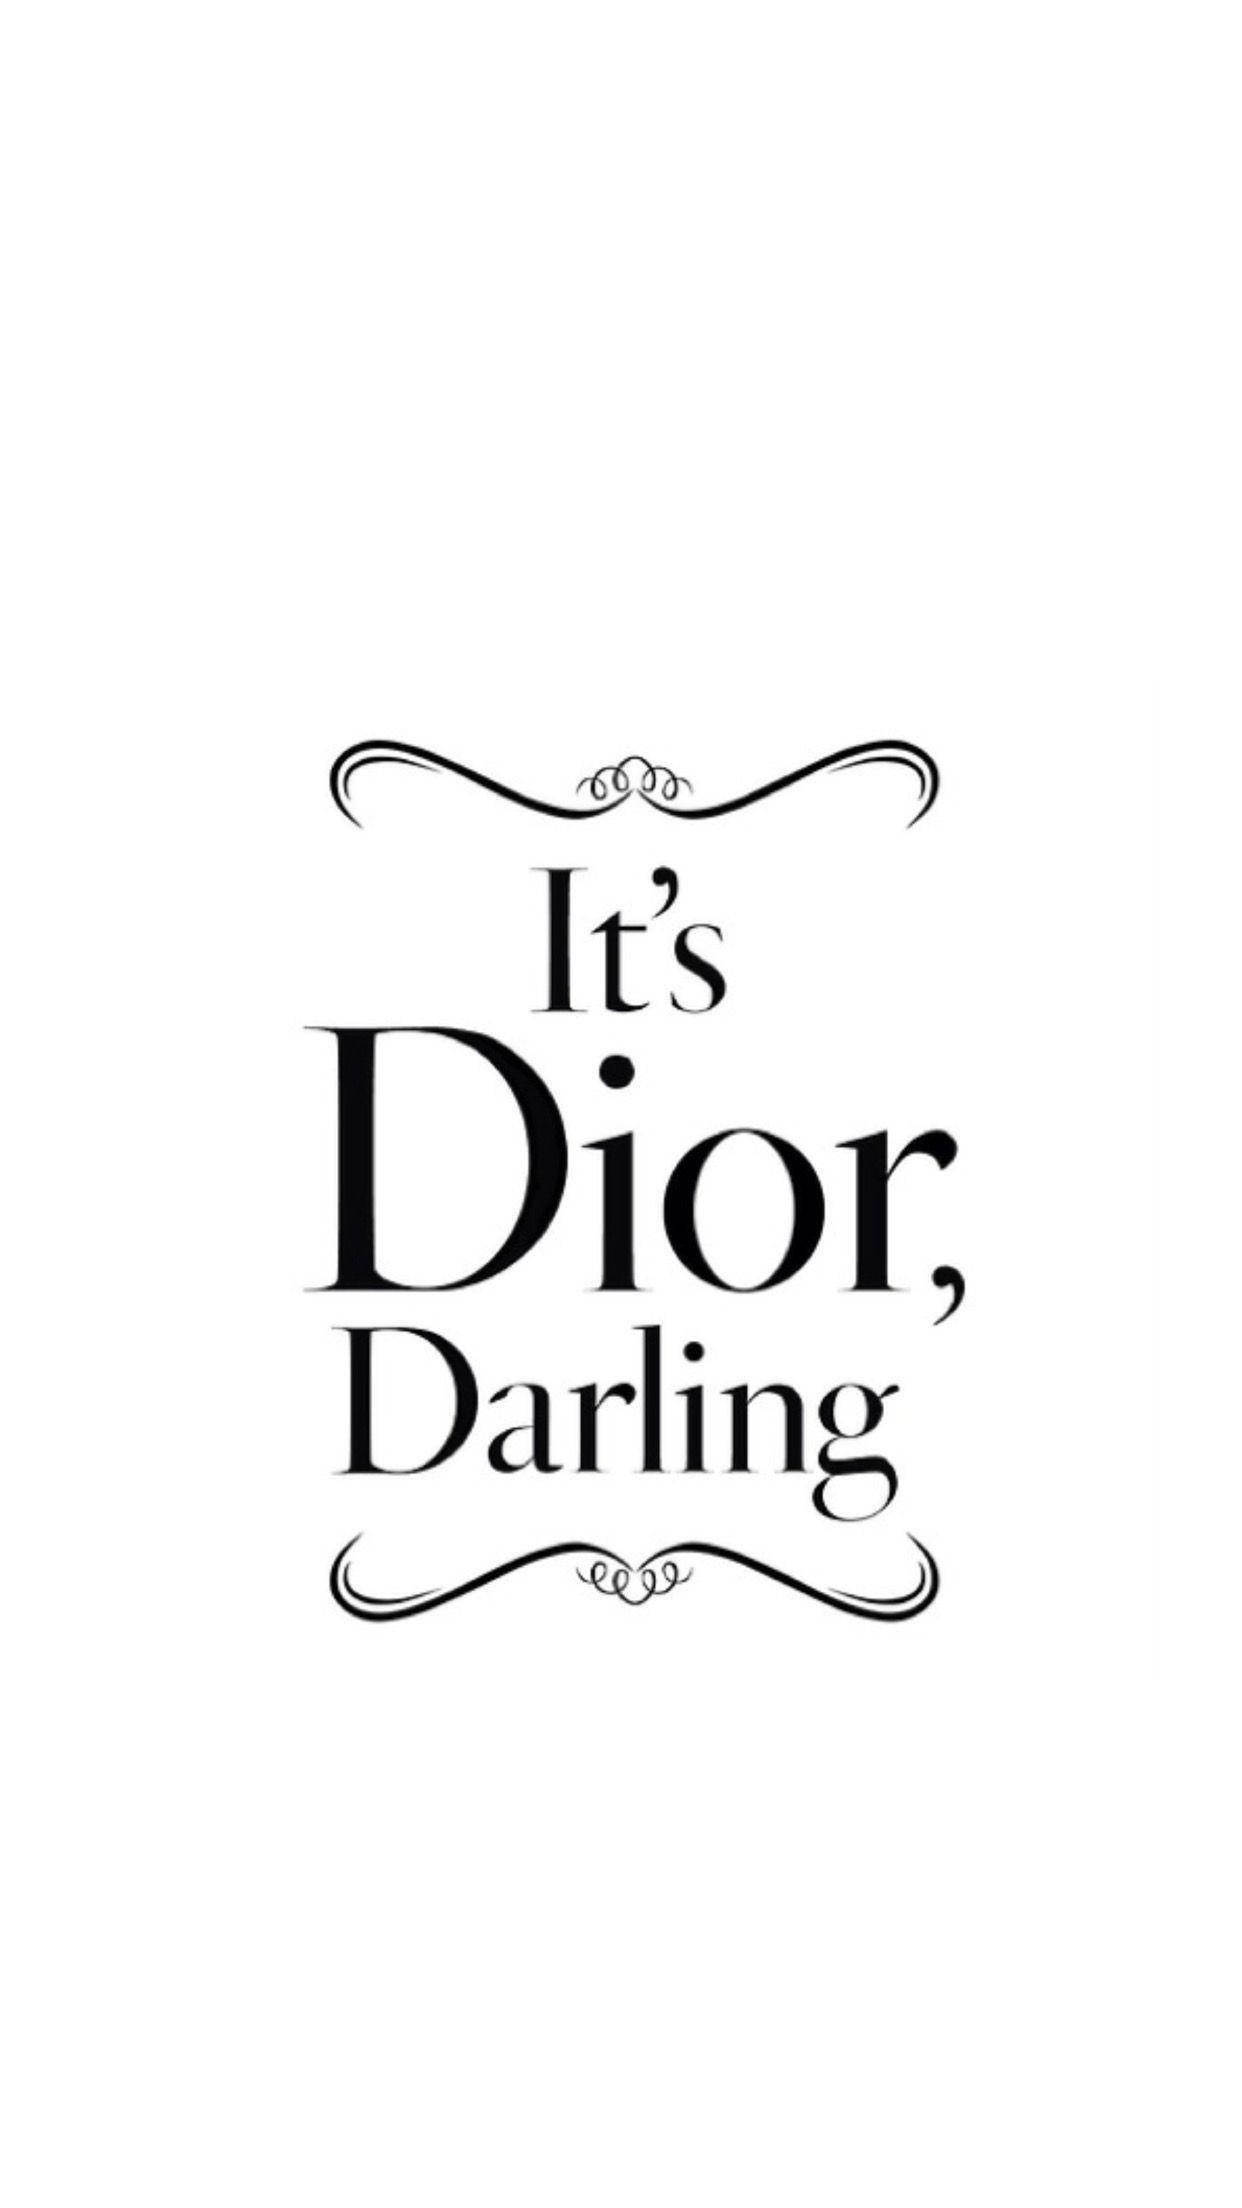 Download Christian Dior Wallpapers Free for Android  Christian Dior  Wallpapers APK Download  STEPrimocom